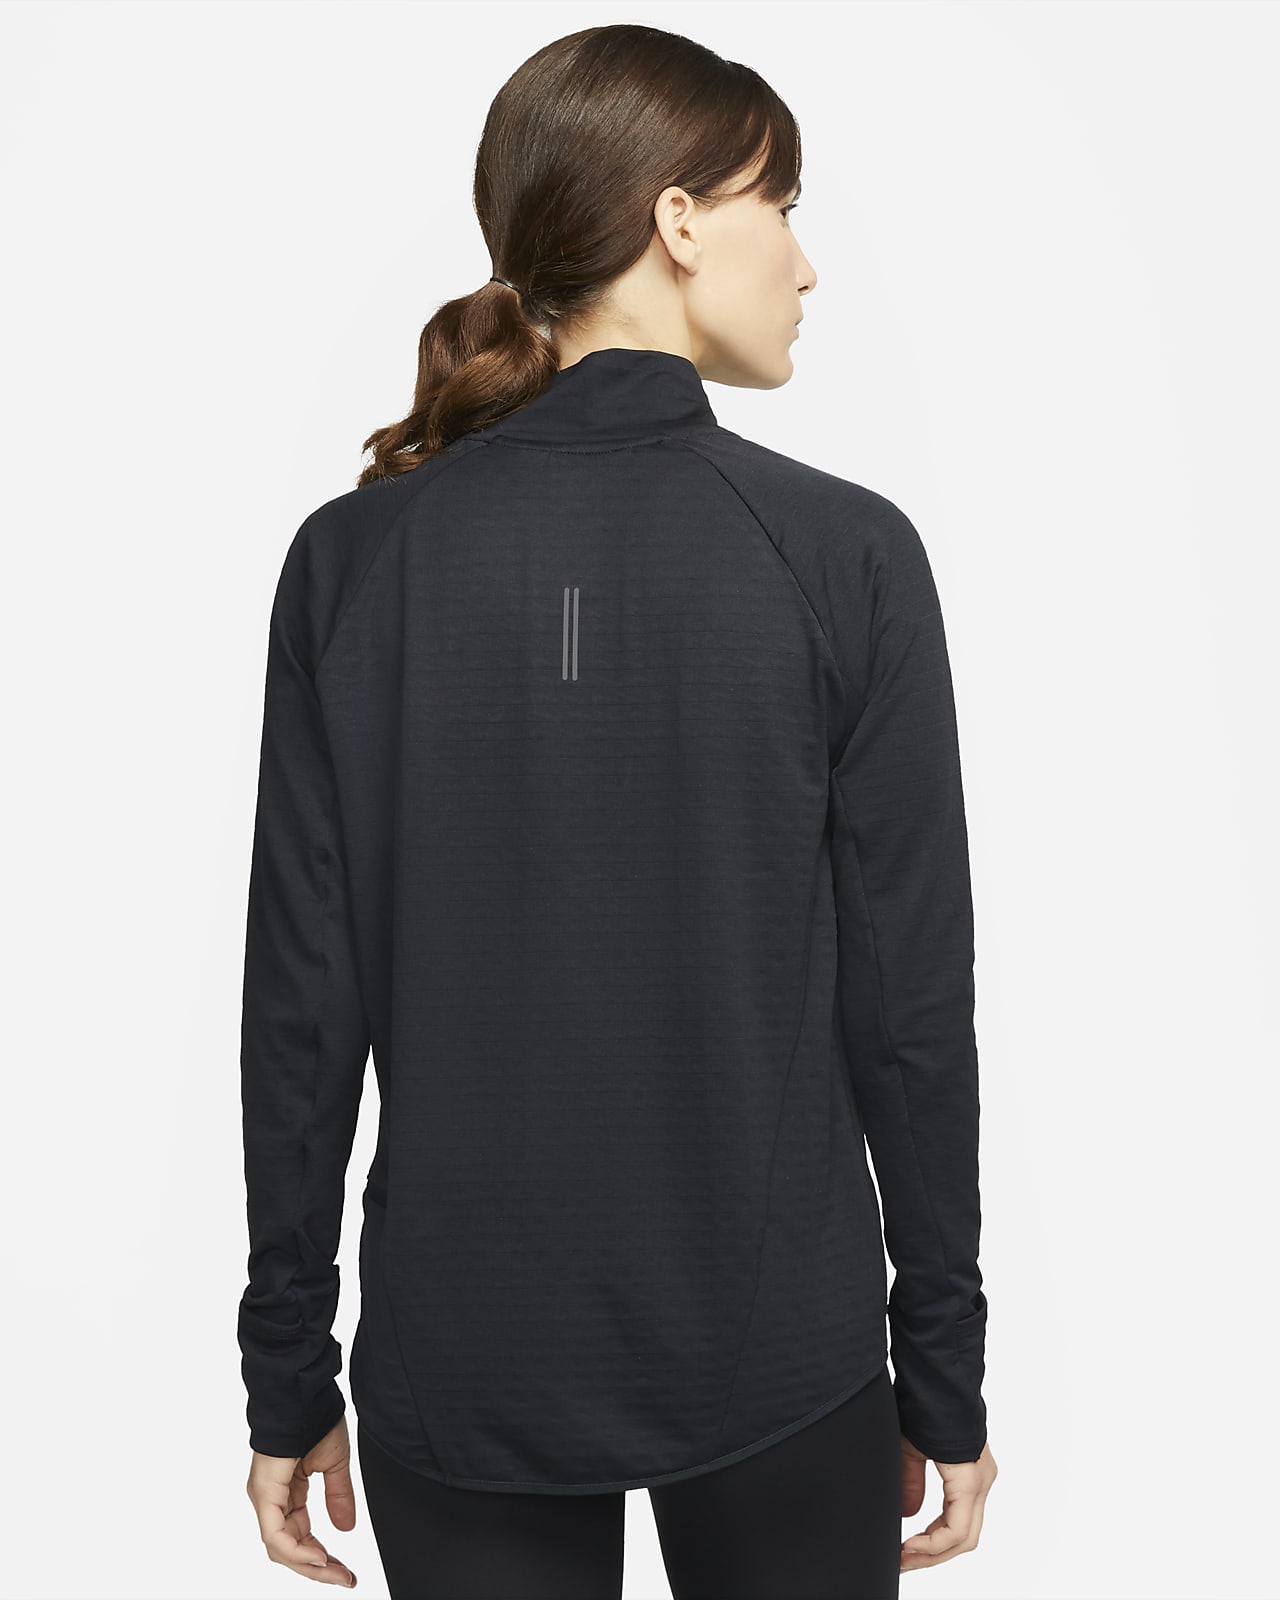 Nike Therma-FIT Element 1/2-Zip Running Top.